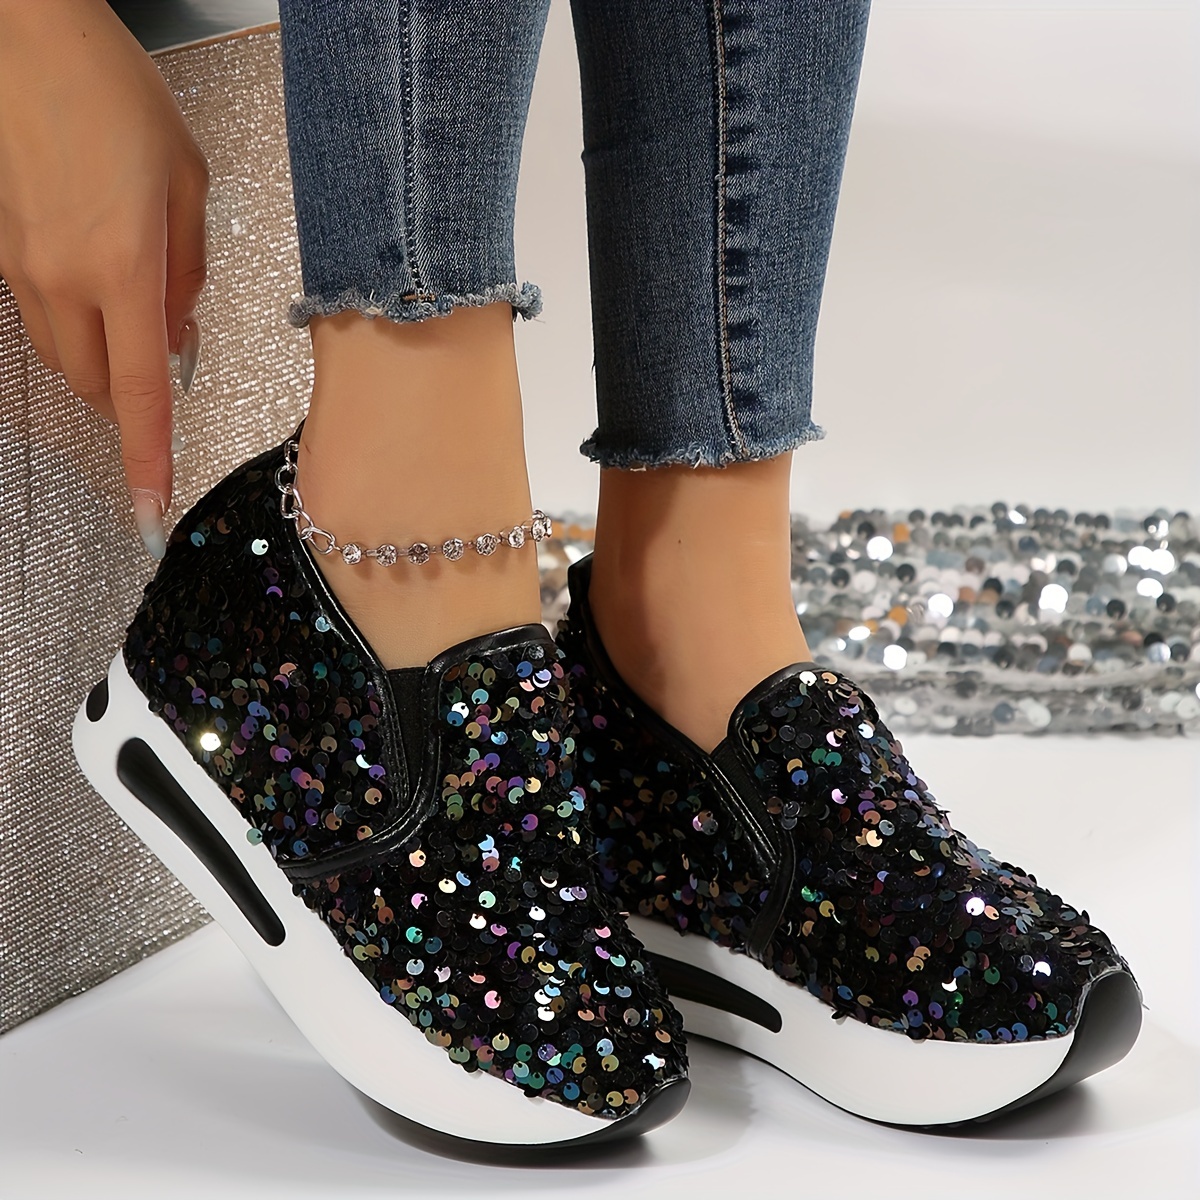 Womens Platform Shoes Casual Shoes Glitter Upper Sneakers Walking Fitness  Shoes